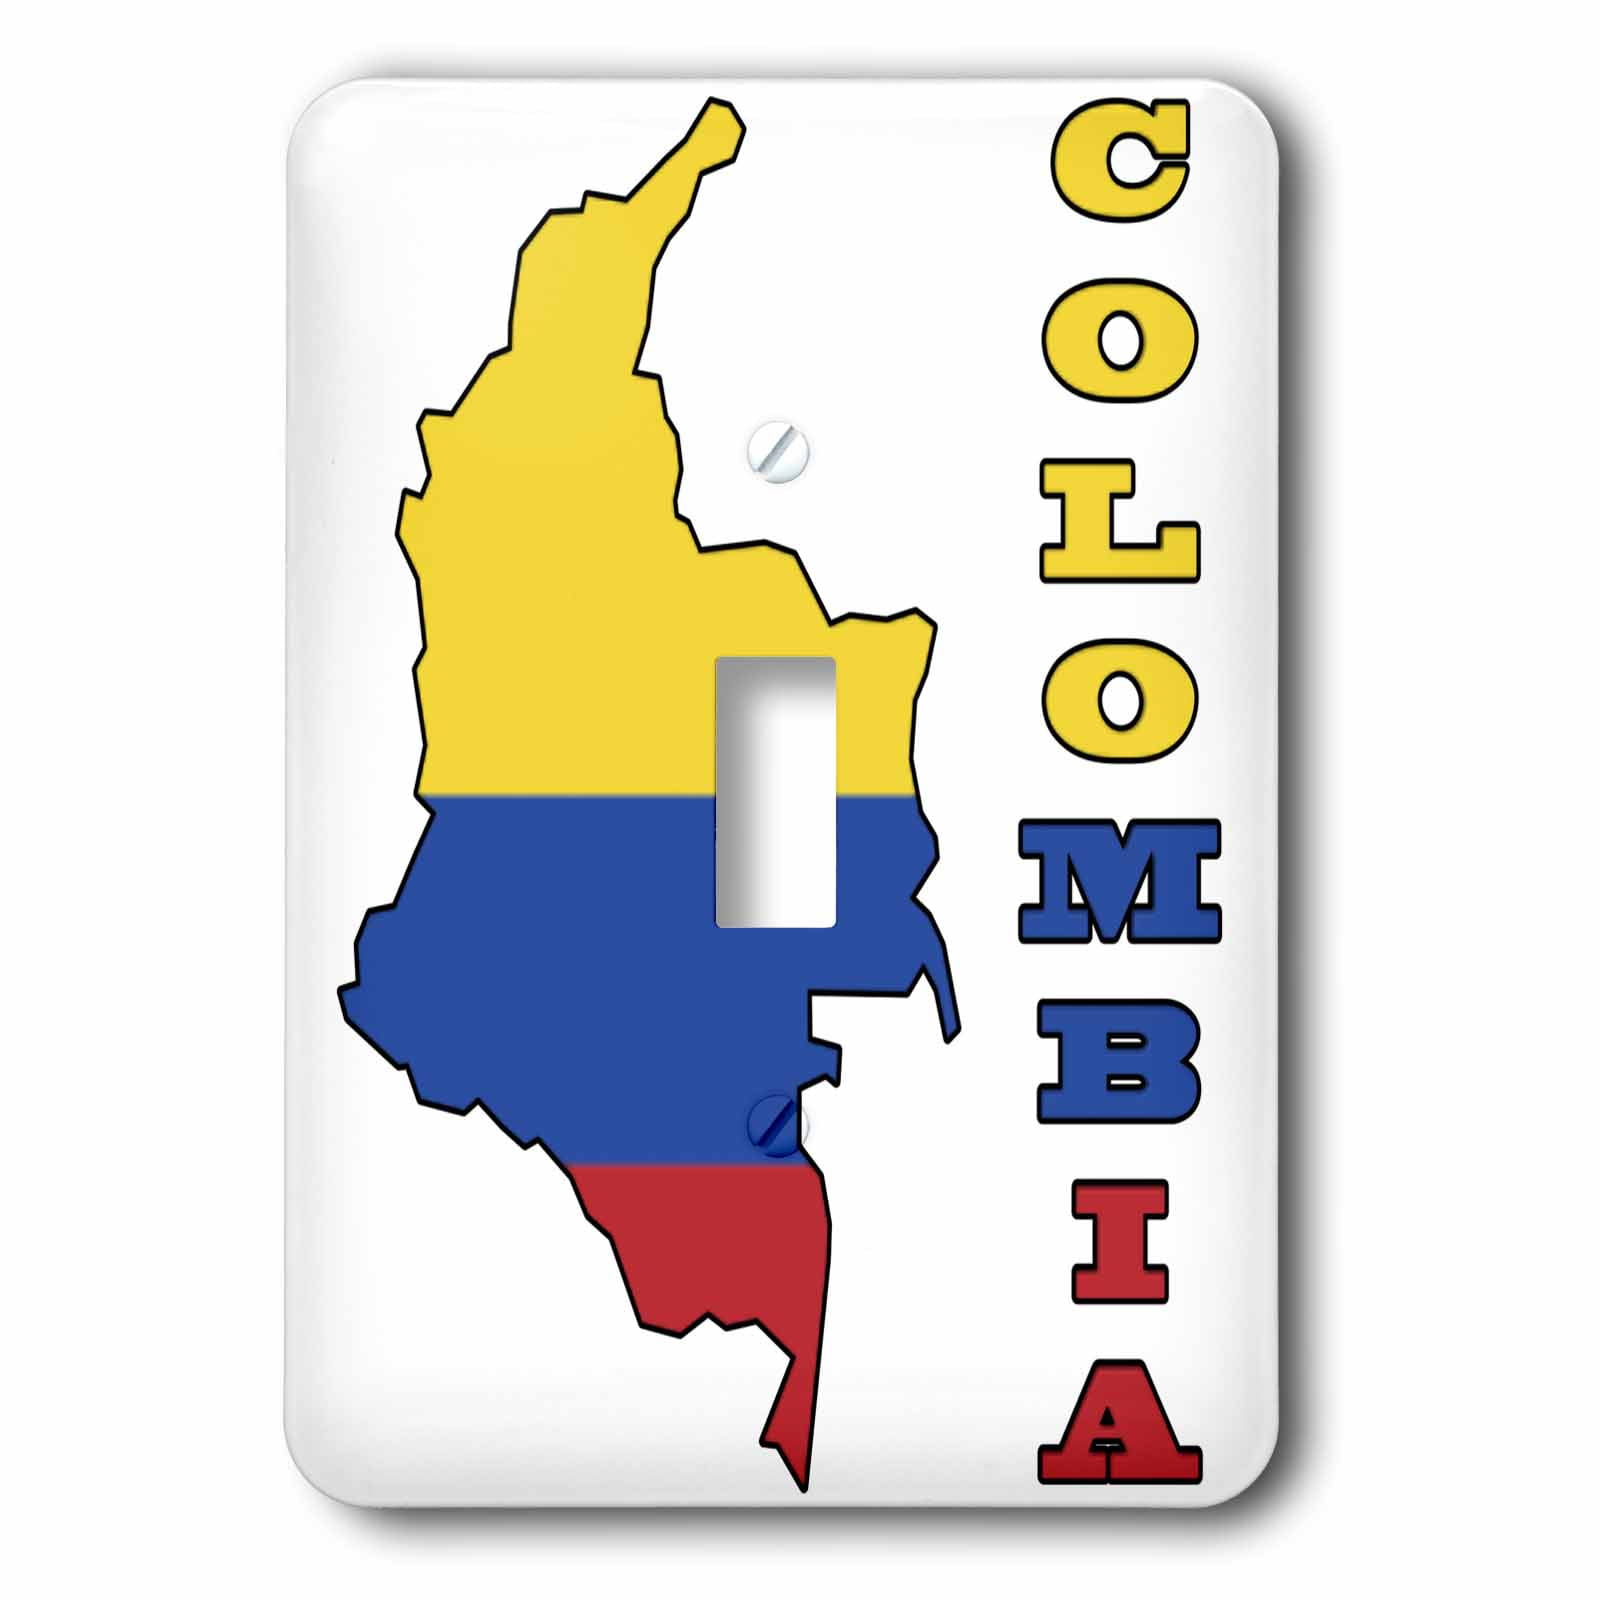 3dRose lsp_47675_2 Flag and Map of Costa Rica with Republic of Costa Rica printed in both English and Spanish Double Toggle Switch